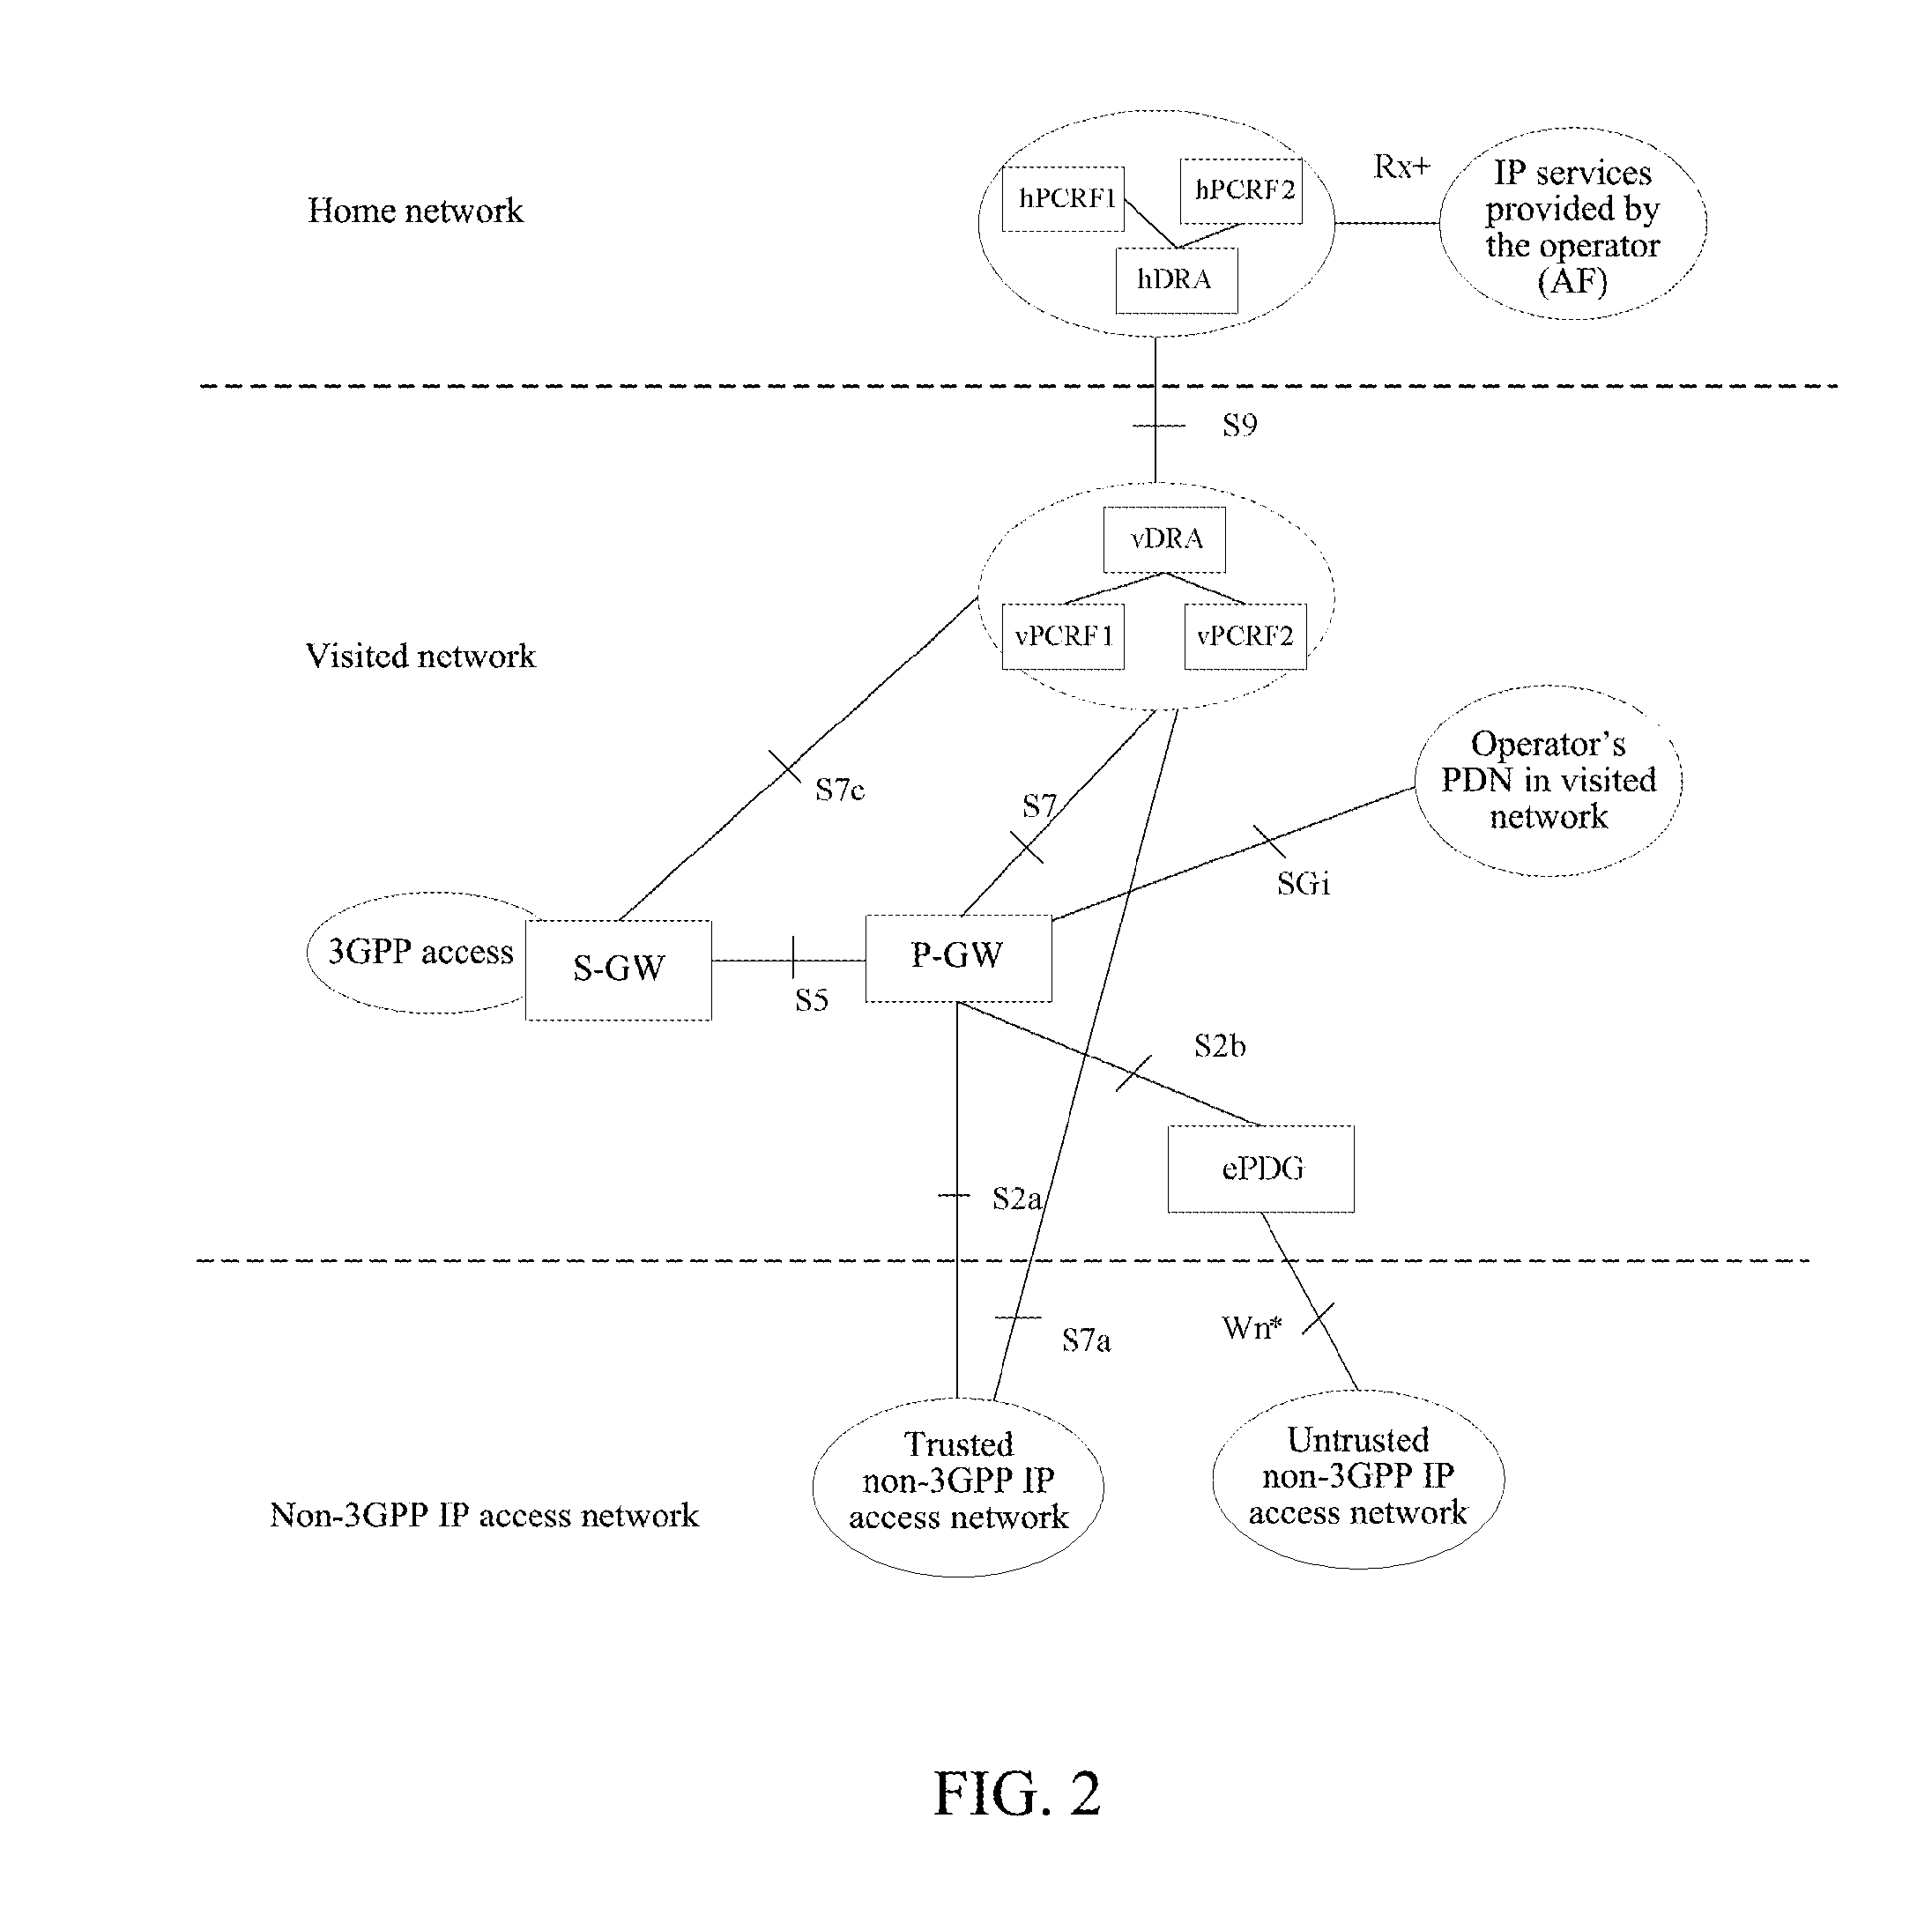 Method for selecting policy and charging rules function